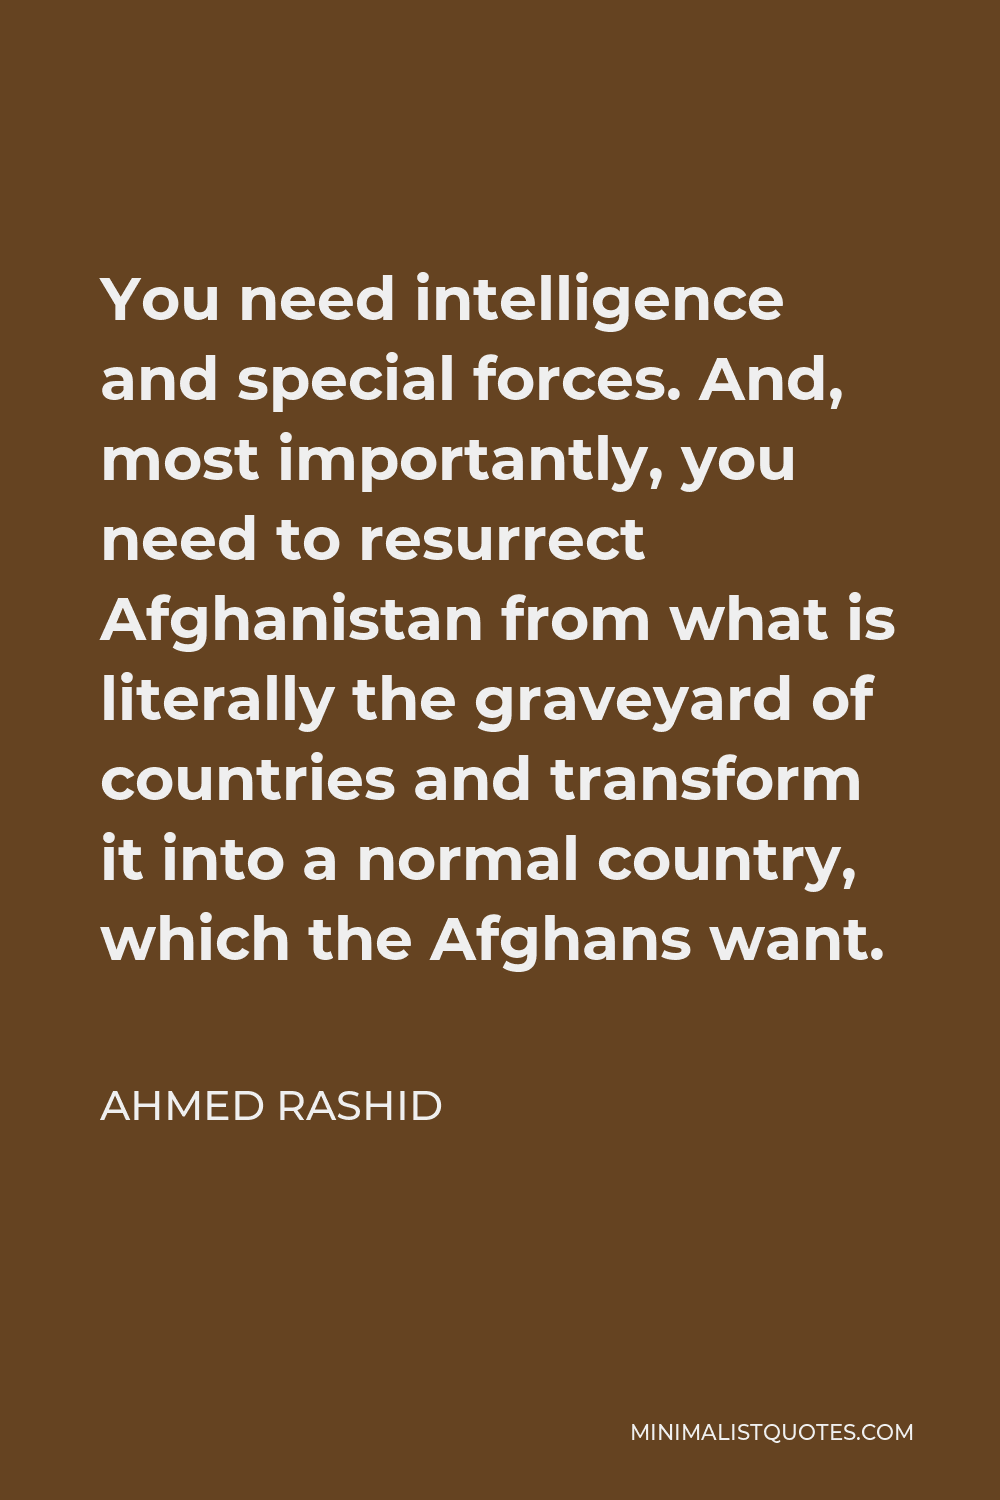 Ahmed Rashid Quote - You need intelligence and special forces. And, most importantly, you need to resurrect Afghanistan from what is literally the graveyard of countries and transform it into a normal country, which the Afghans want.